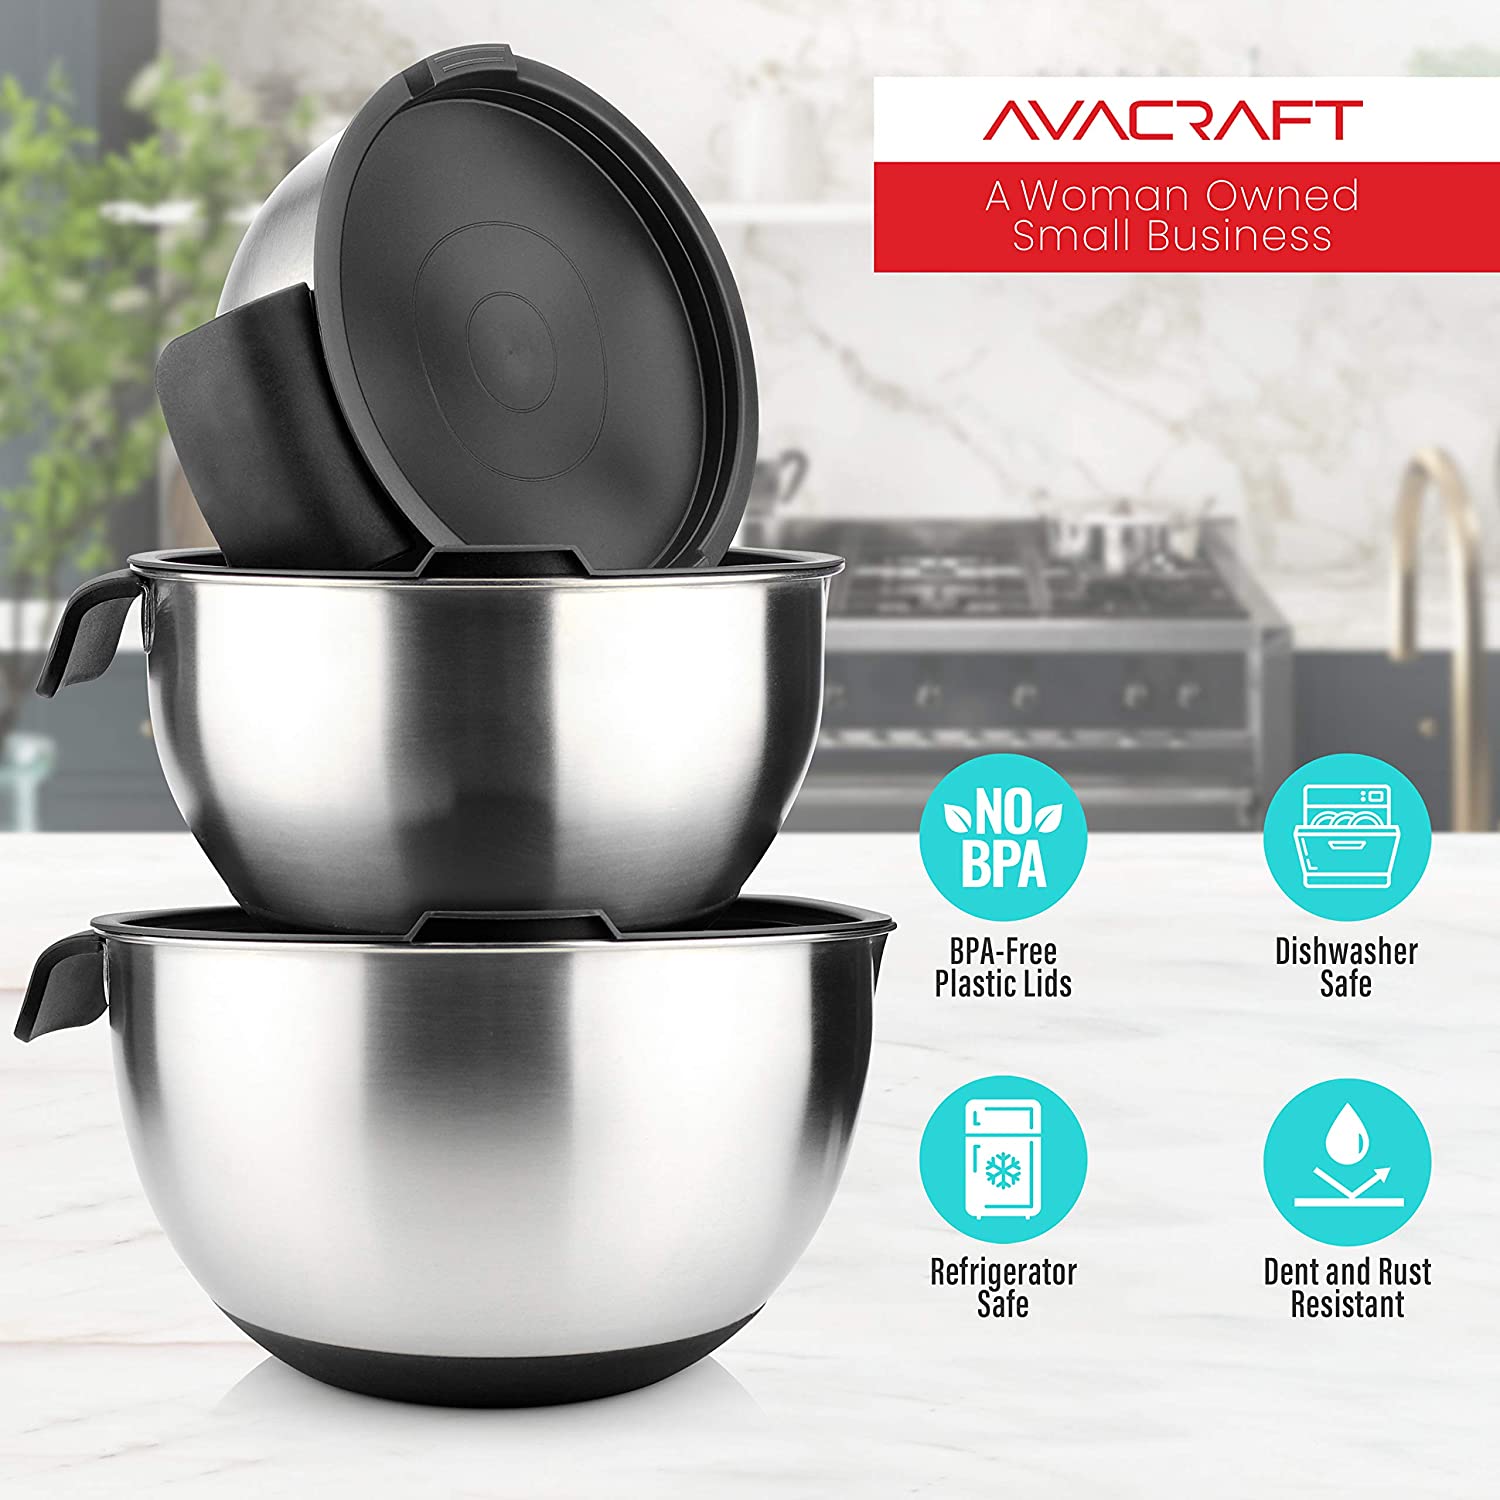 AVACRAFT 18/10 Top Rated Stainless Steel Mixing Bowls with Lids, Non-Slip Silicone Base, Measurement Marks and Handle, (Black)